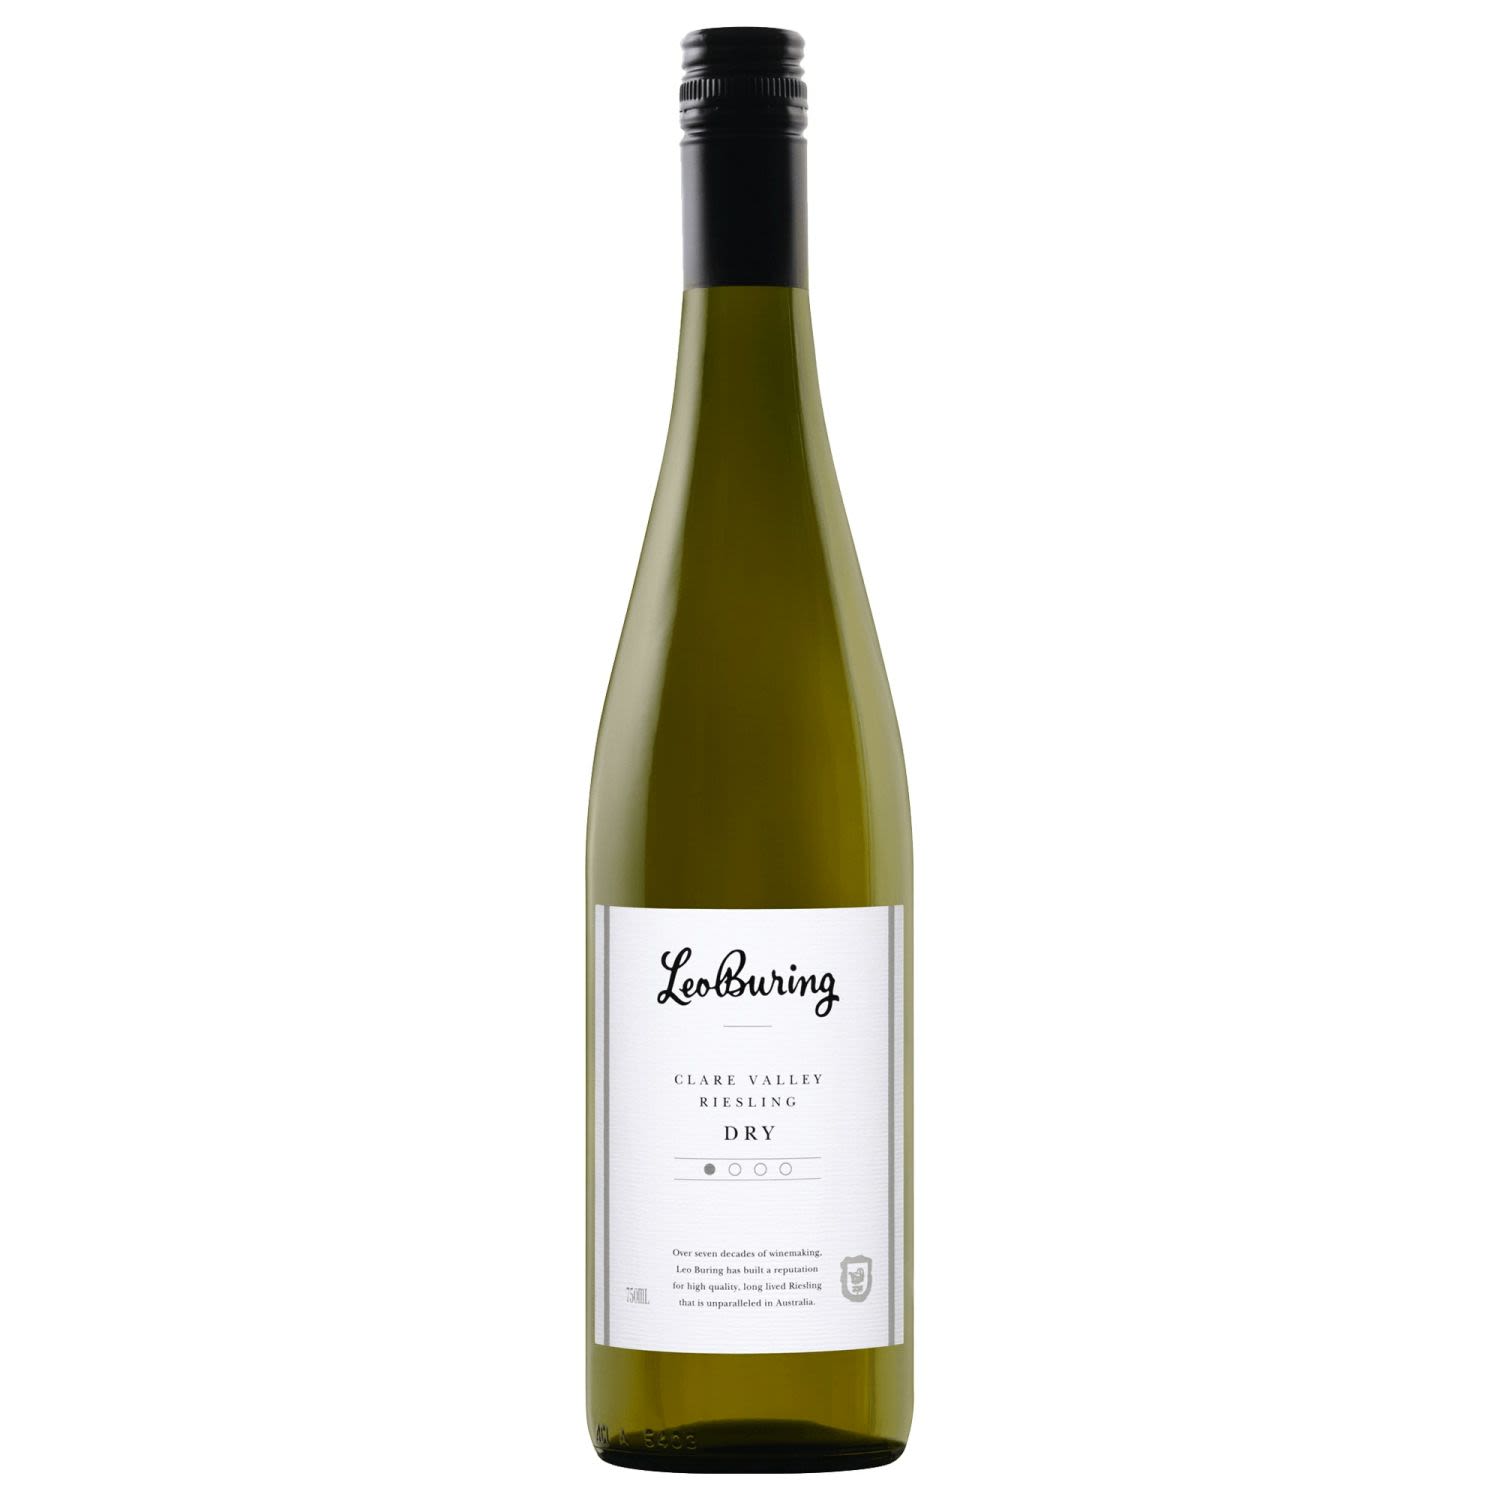 Citrus aromas mixed with hints of floral characters delicately blend. The palate is intense with excellent fruit intensity, attractive lemon/lime splice notes with a distinct 'pretty' floral edge, a core of natural acidity gives flavour & length to this wonderful riesling.<br /> <br />Alcohol Volume: 11.50%<br /><br />Pack Format: Bottle<br /><br />Standard Drinks: 6.8</br /><br />Pack Type: Bottle<br /><br />Country of Origin: Australia<br /><br />Region: Clare Valley<br /><br />Vintage: Various<br />